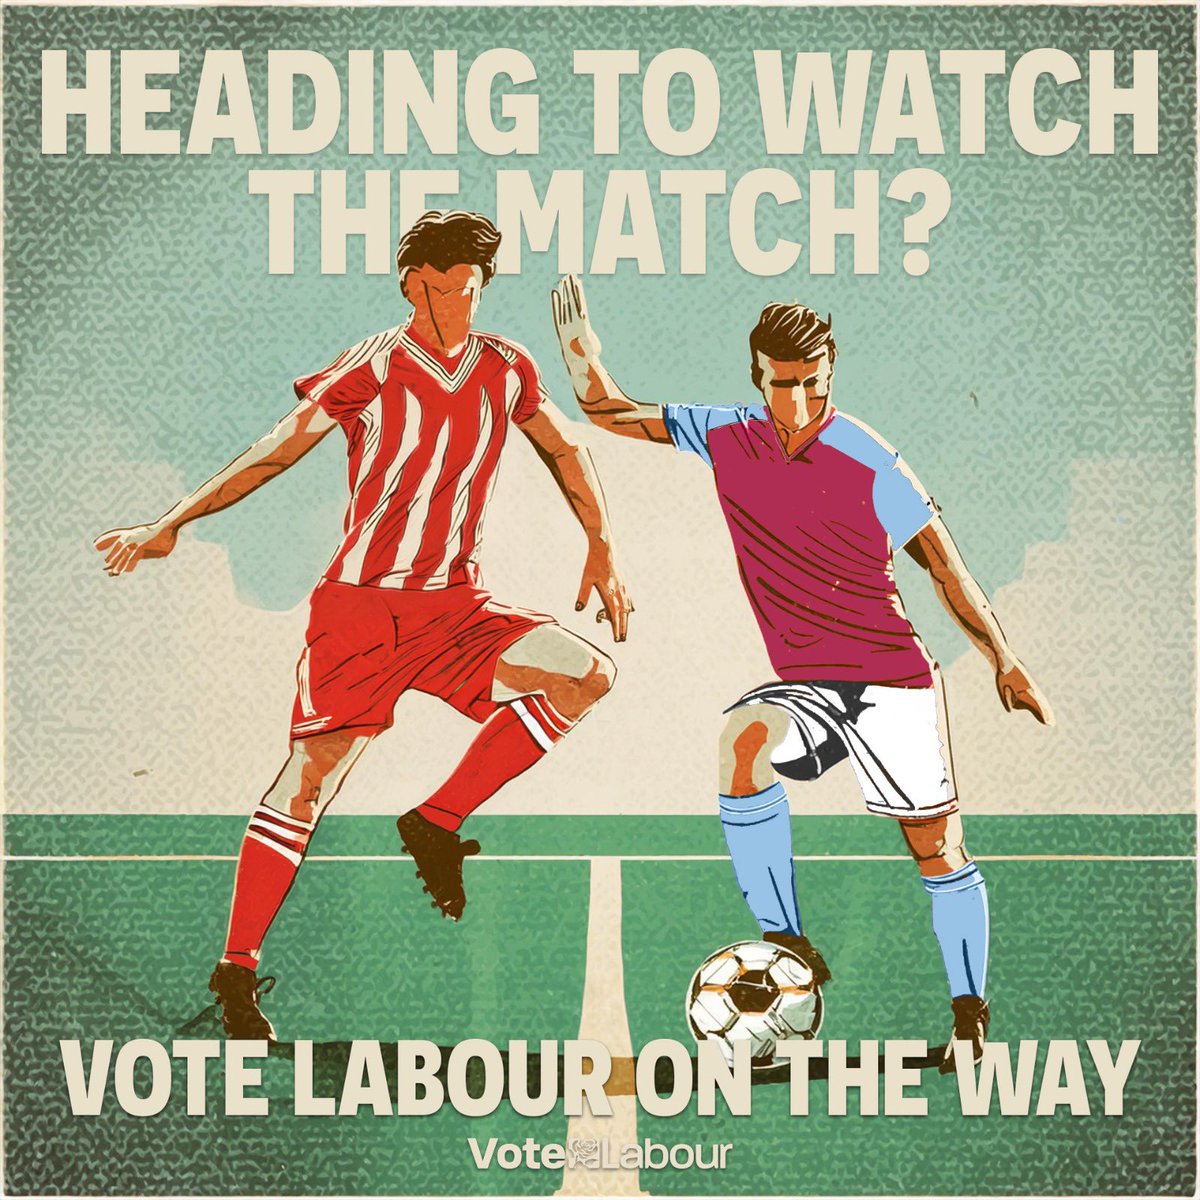 On the way to watch the match? There’s still time to vote. Vote Labour today for a fresh start for our region